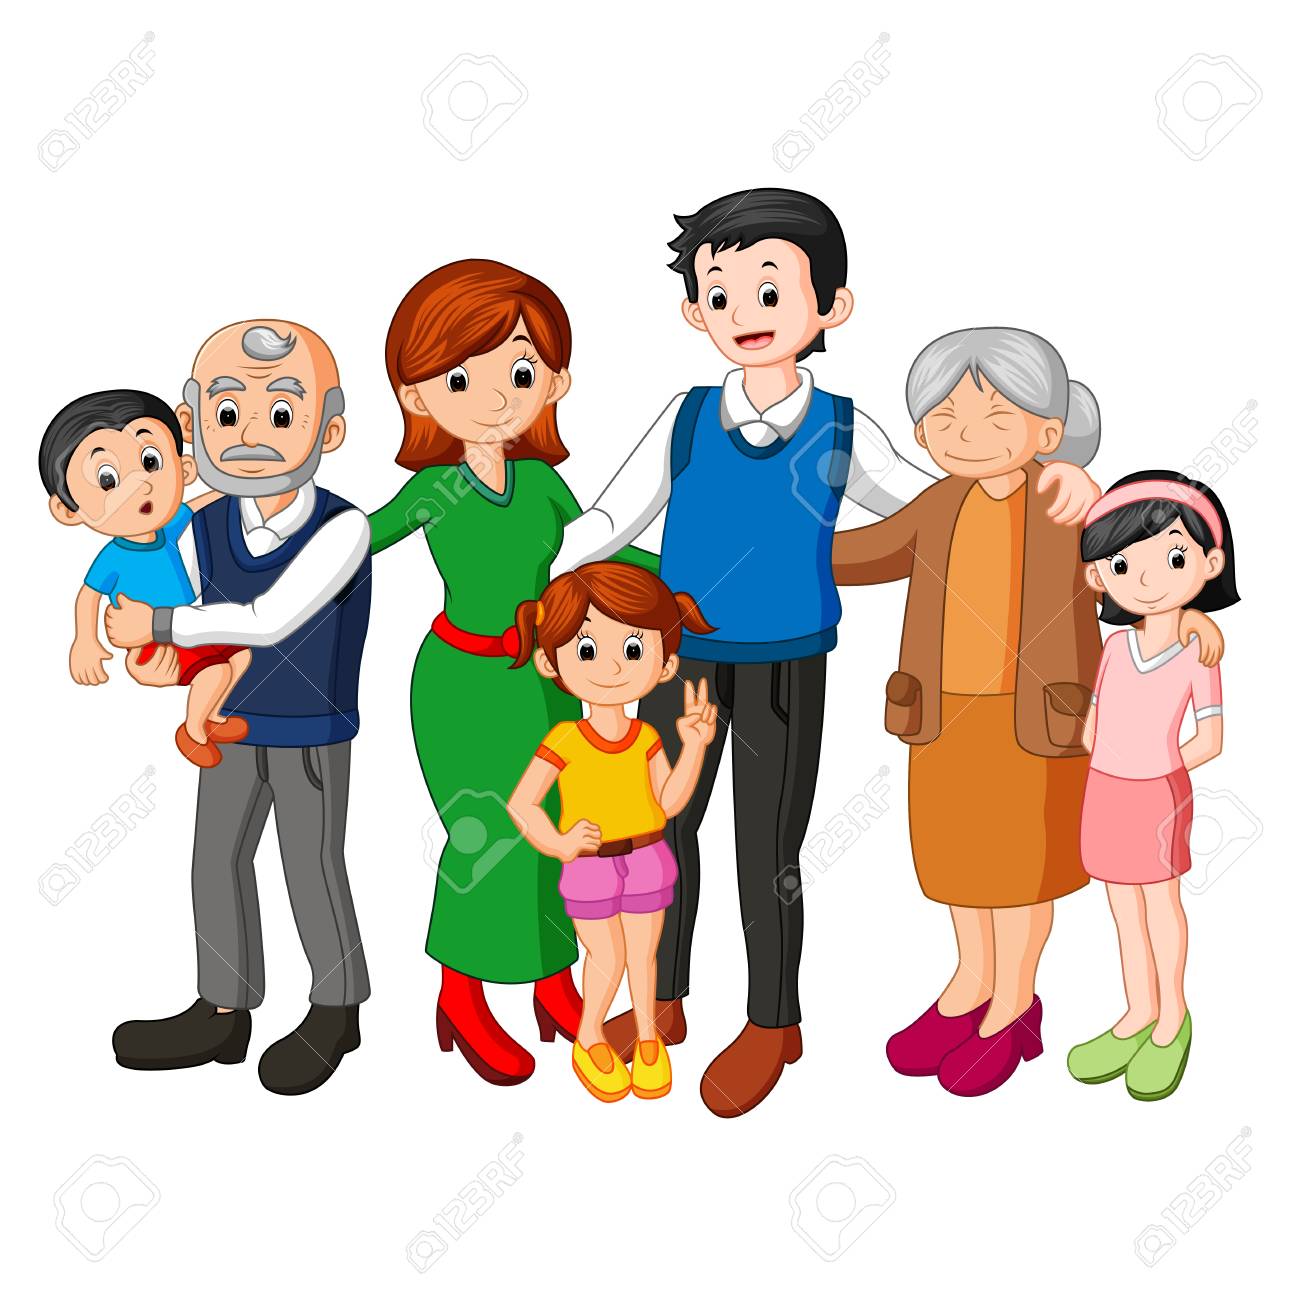 Big family clipart